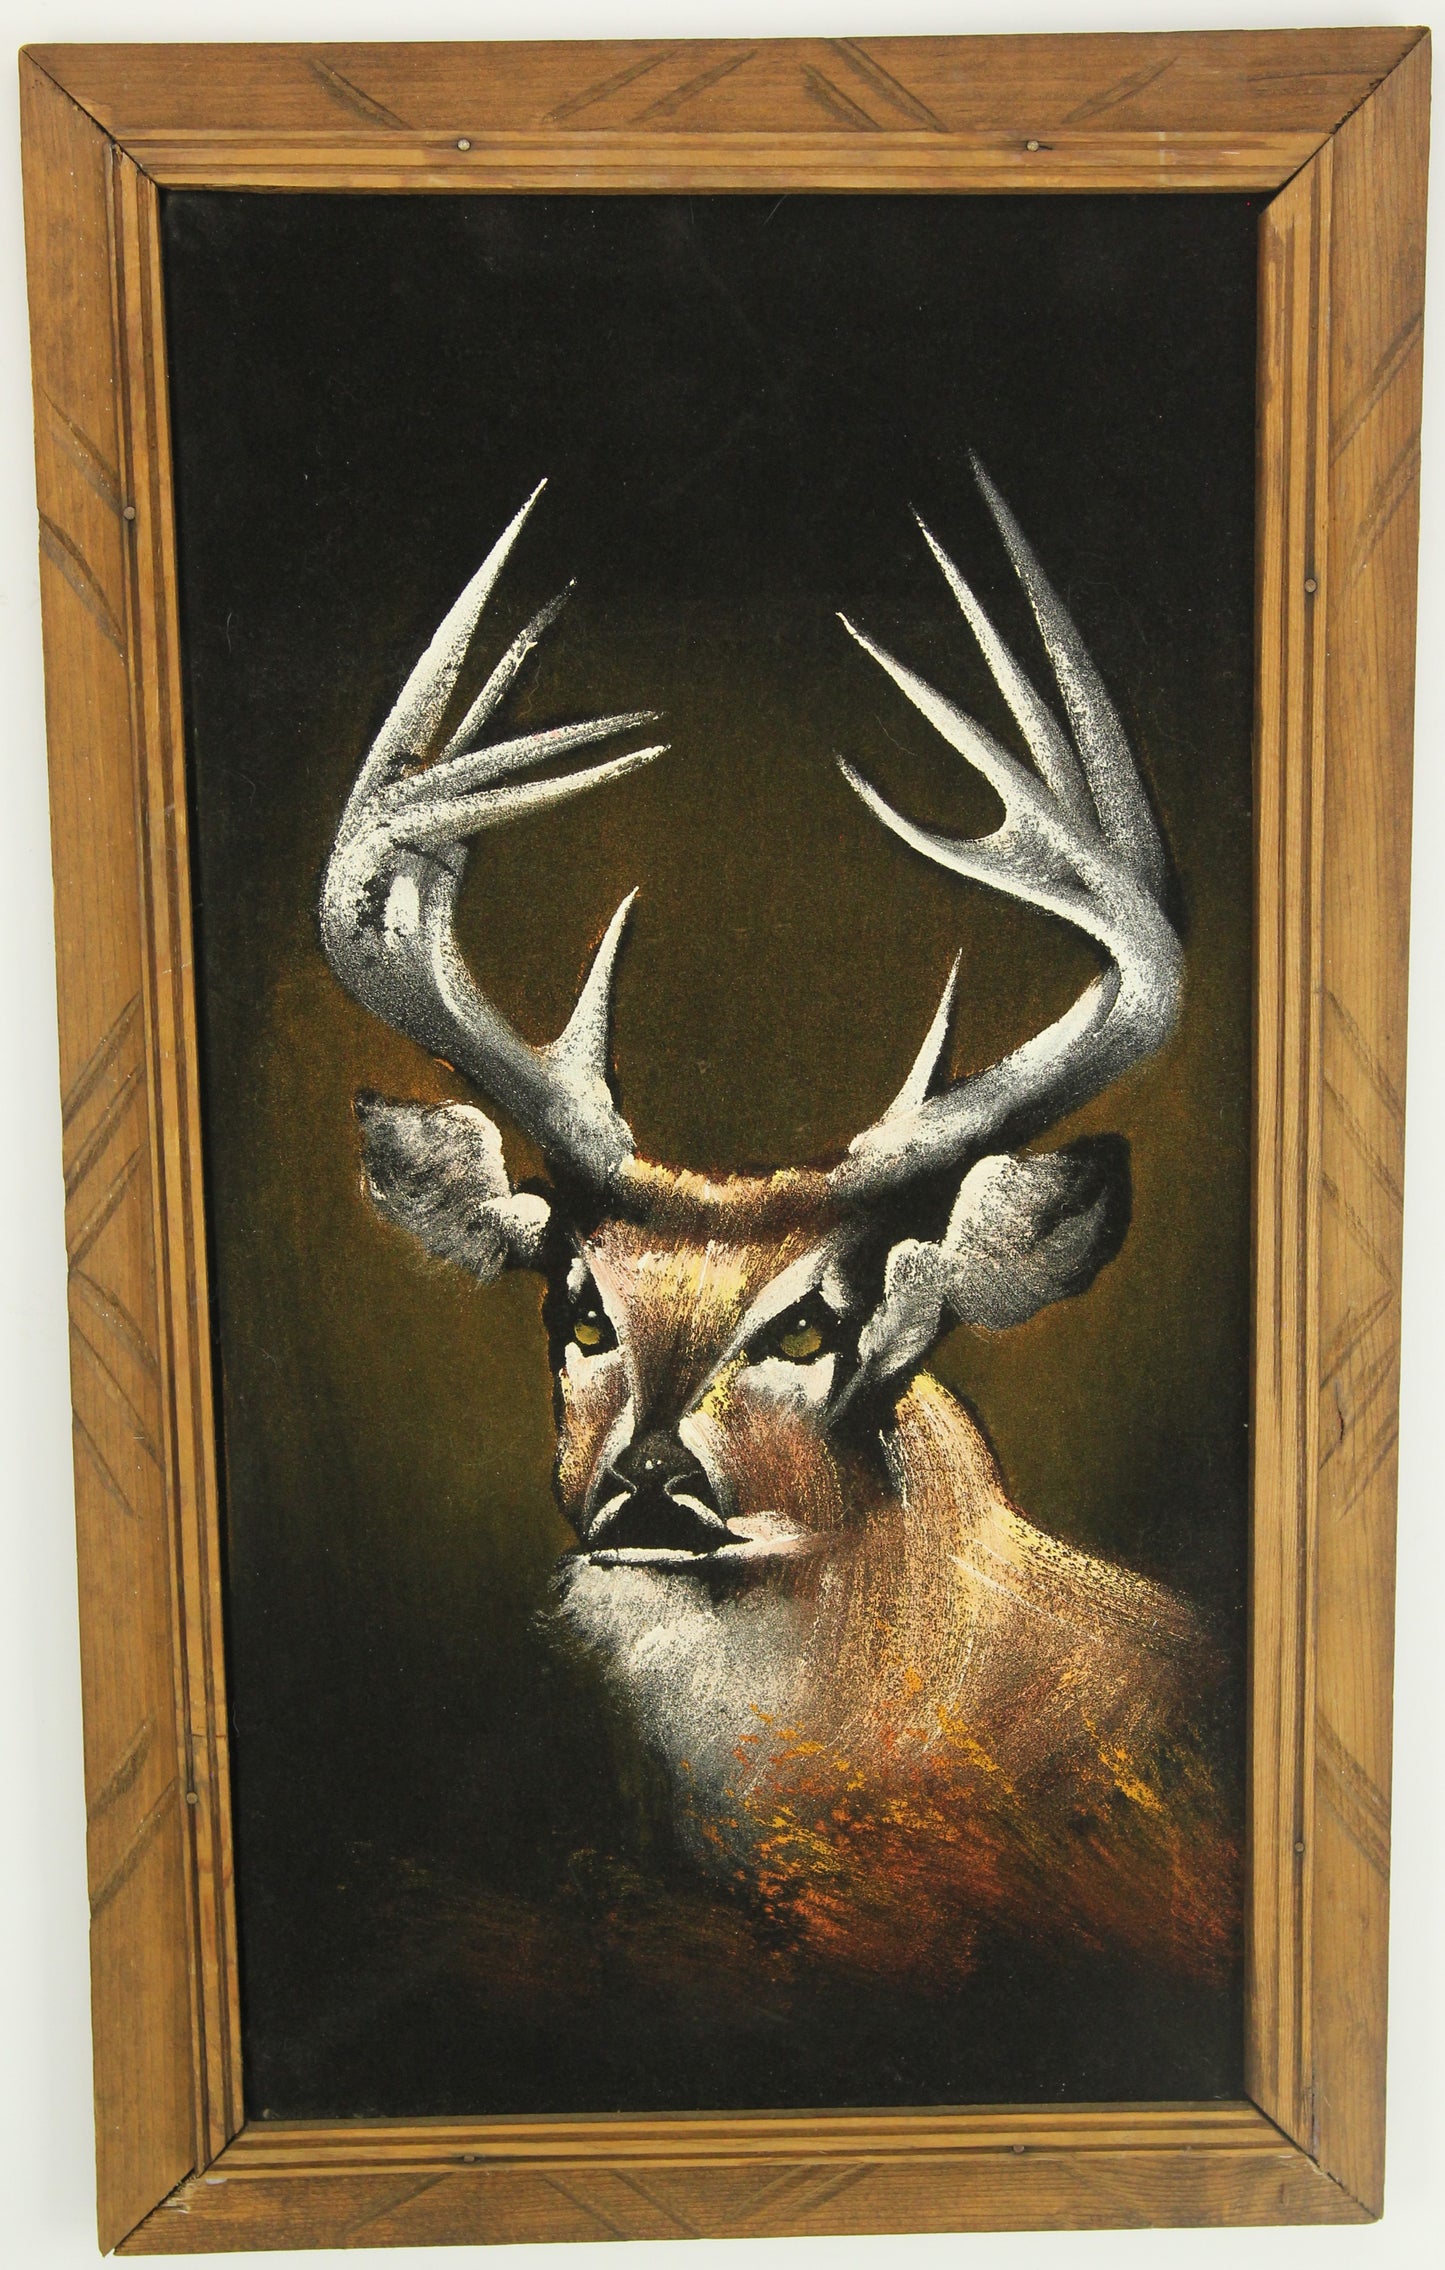 Framed Velvet Painting of a Stag Buck Deer, Made in Mexico - 14 x 22.5"